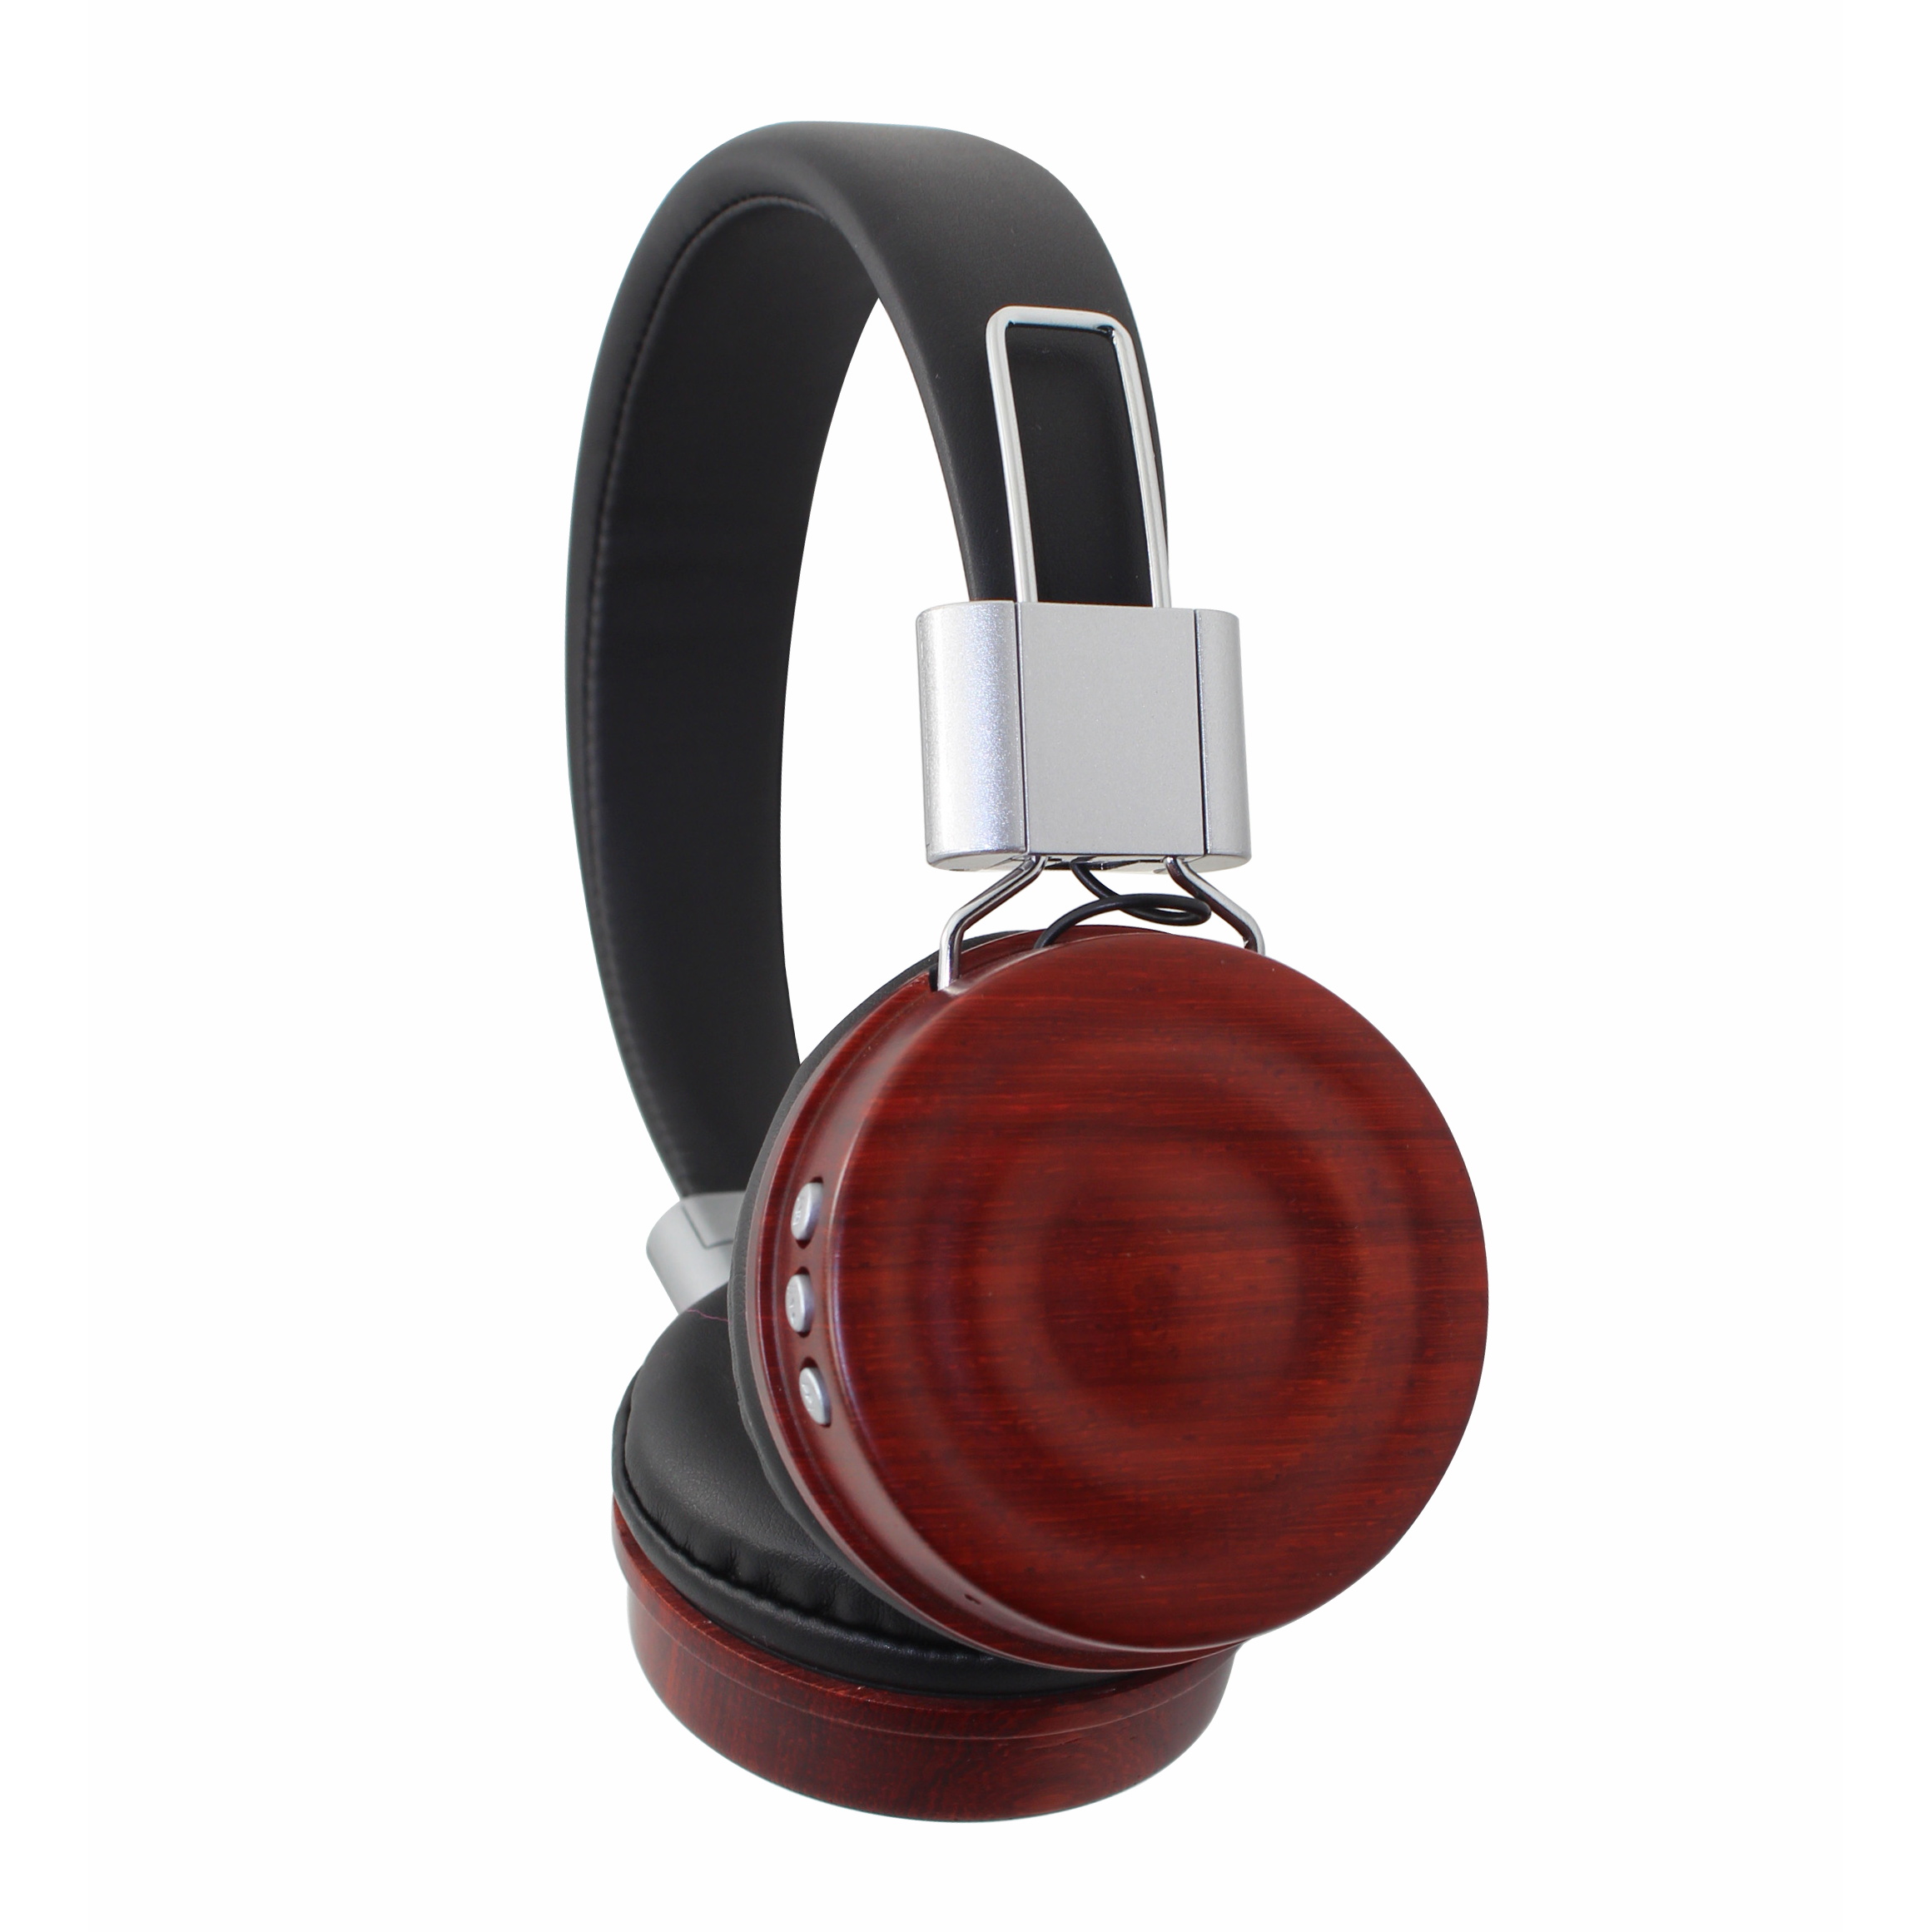 OEM-BL159 Low Price gold metal wood headphones gift bluetooth on ear fashionable wooden headset for 